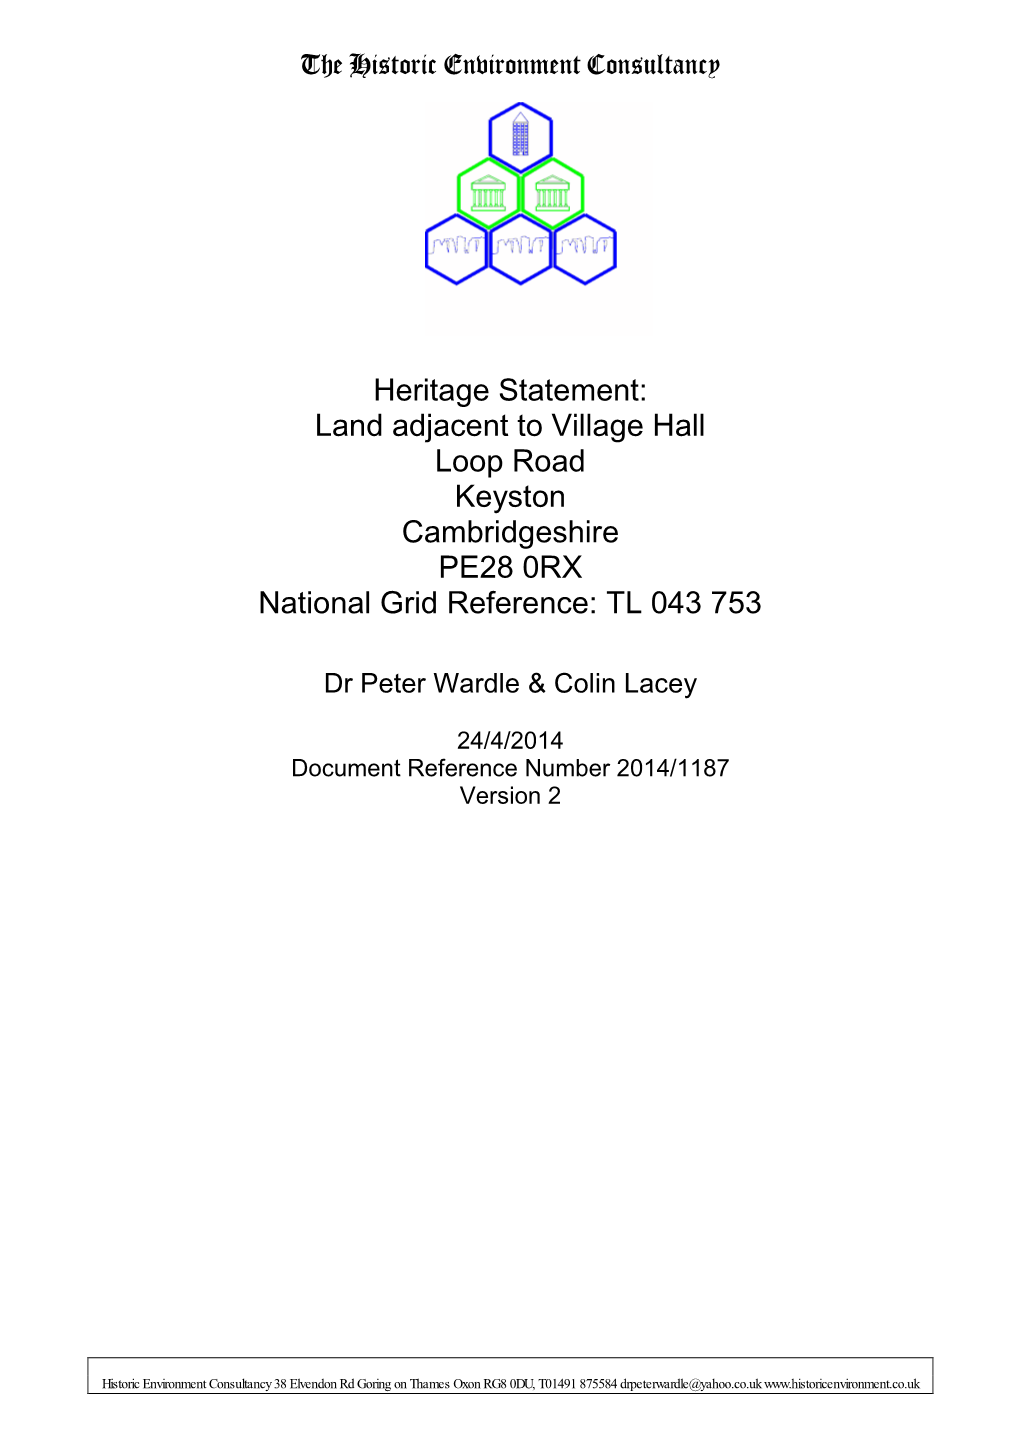 The Historic Environment Consultancy Heritage Statement: Land Adjacent